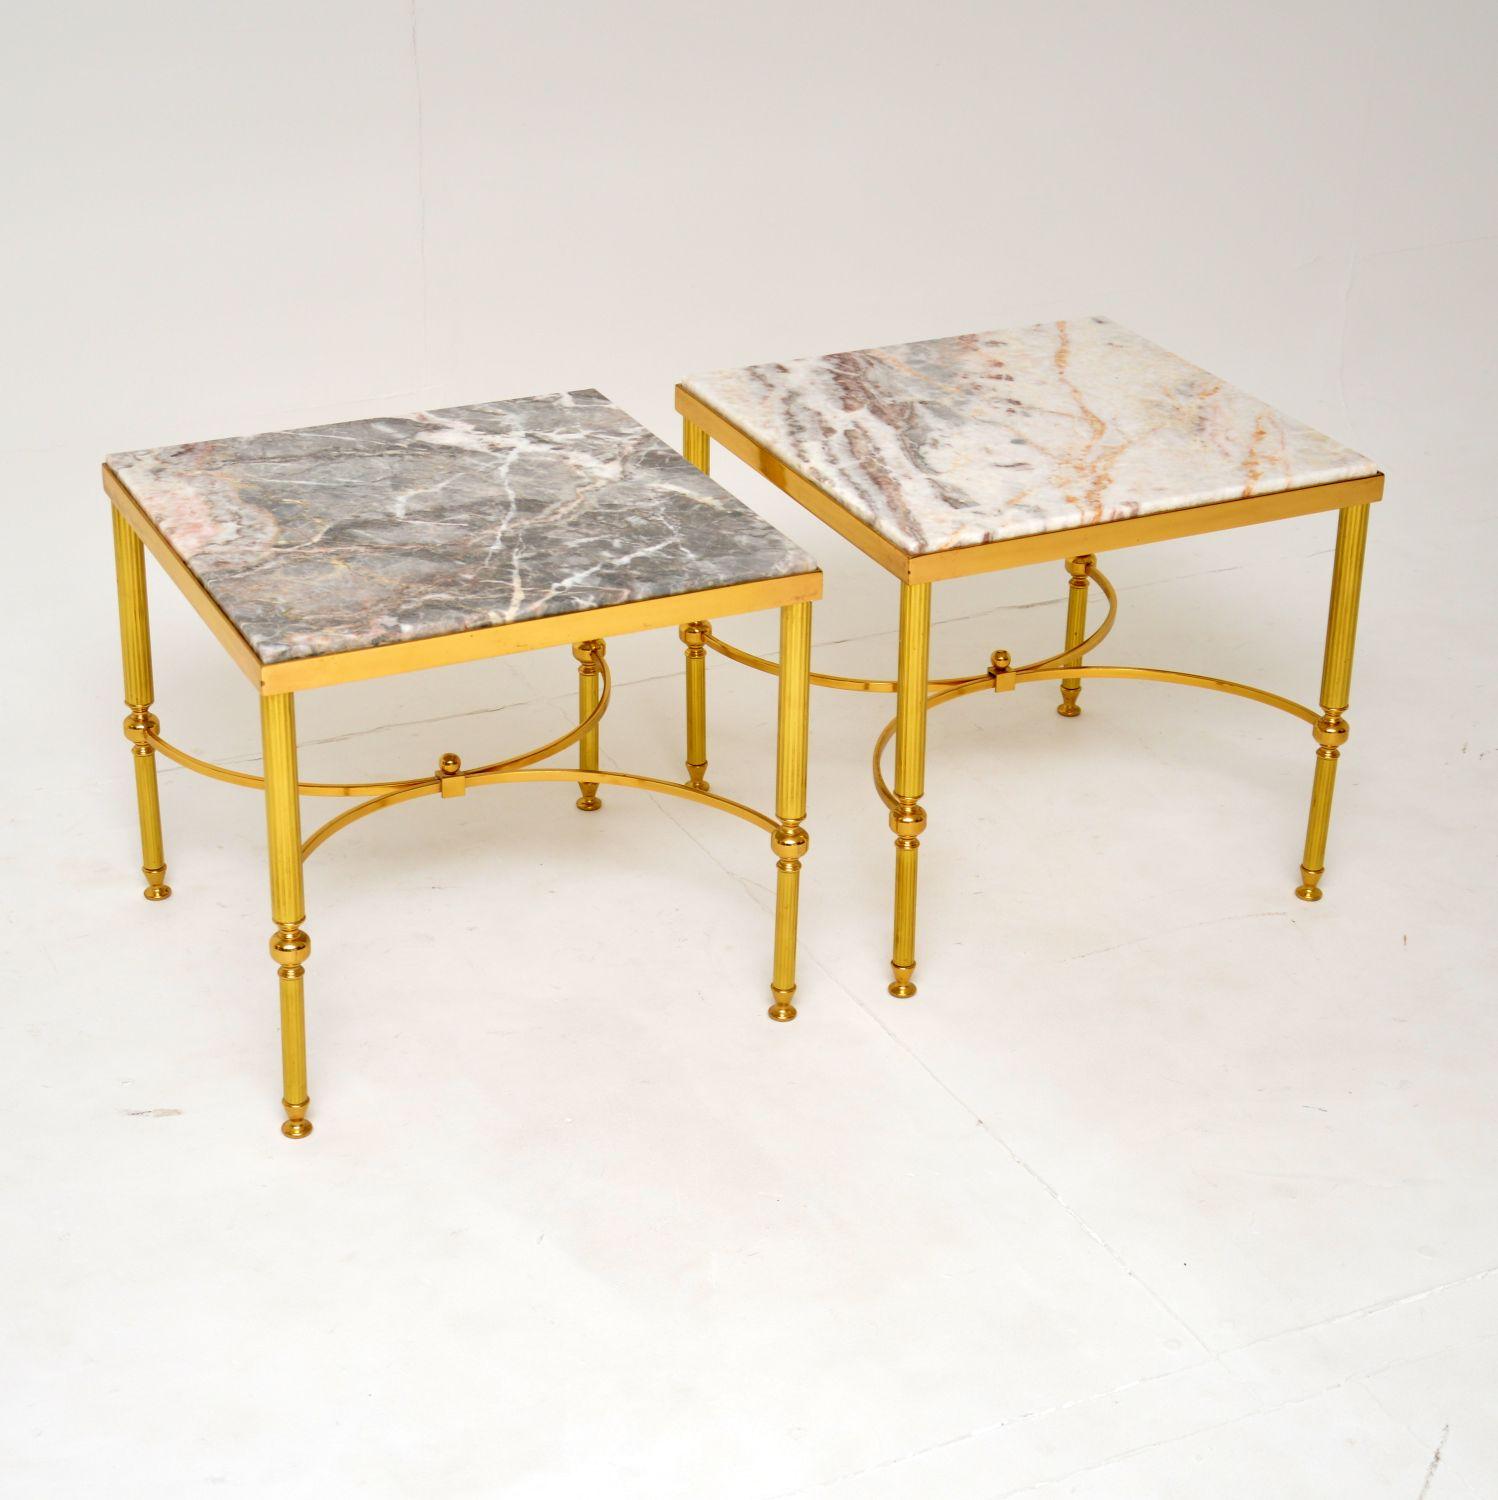 An excellent pair of vintage French marble top brass side tables. They were made in France, and date from the 1960-70’s.

The quality is fantastic, the brass frames have beautifully curved stretchers and fluted legs. They are a very useful and